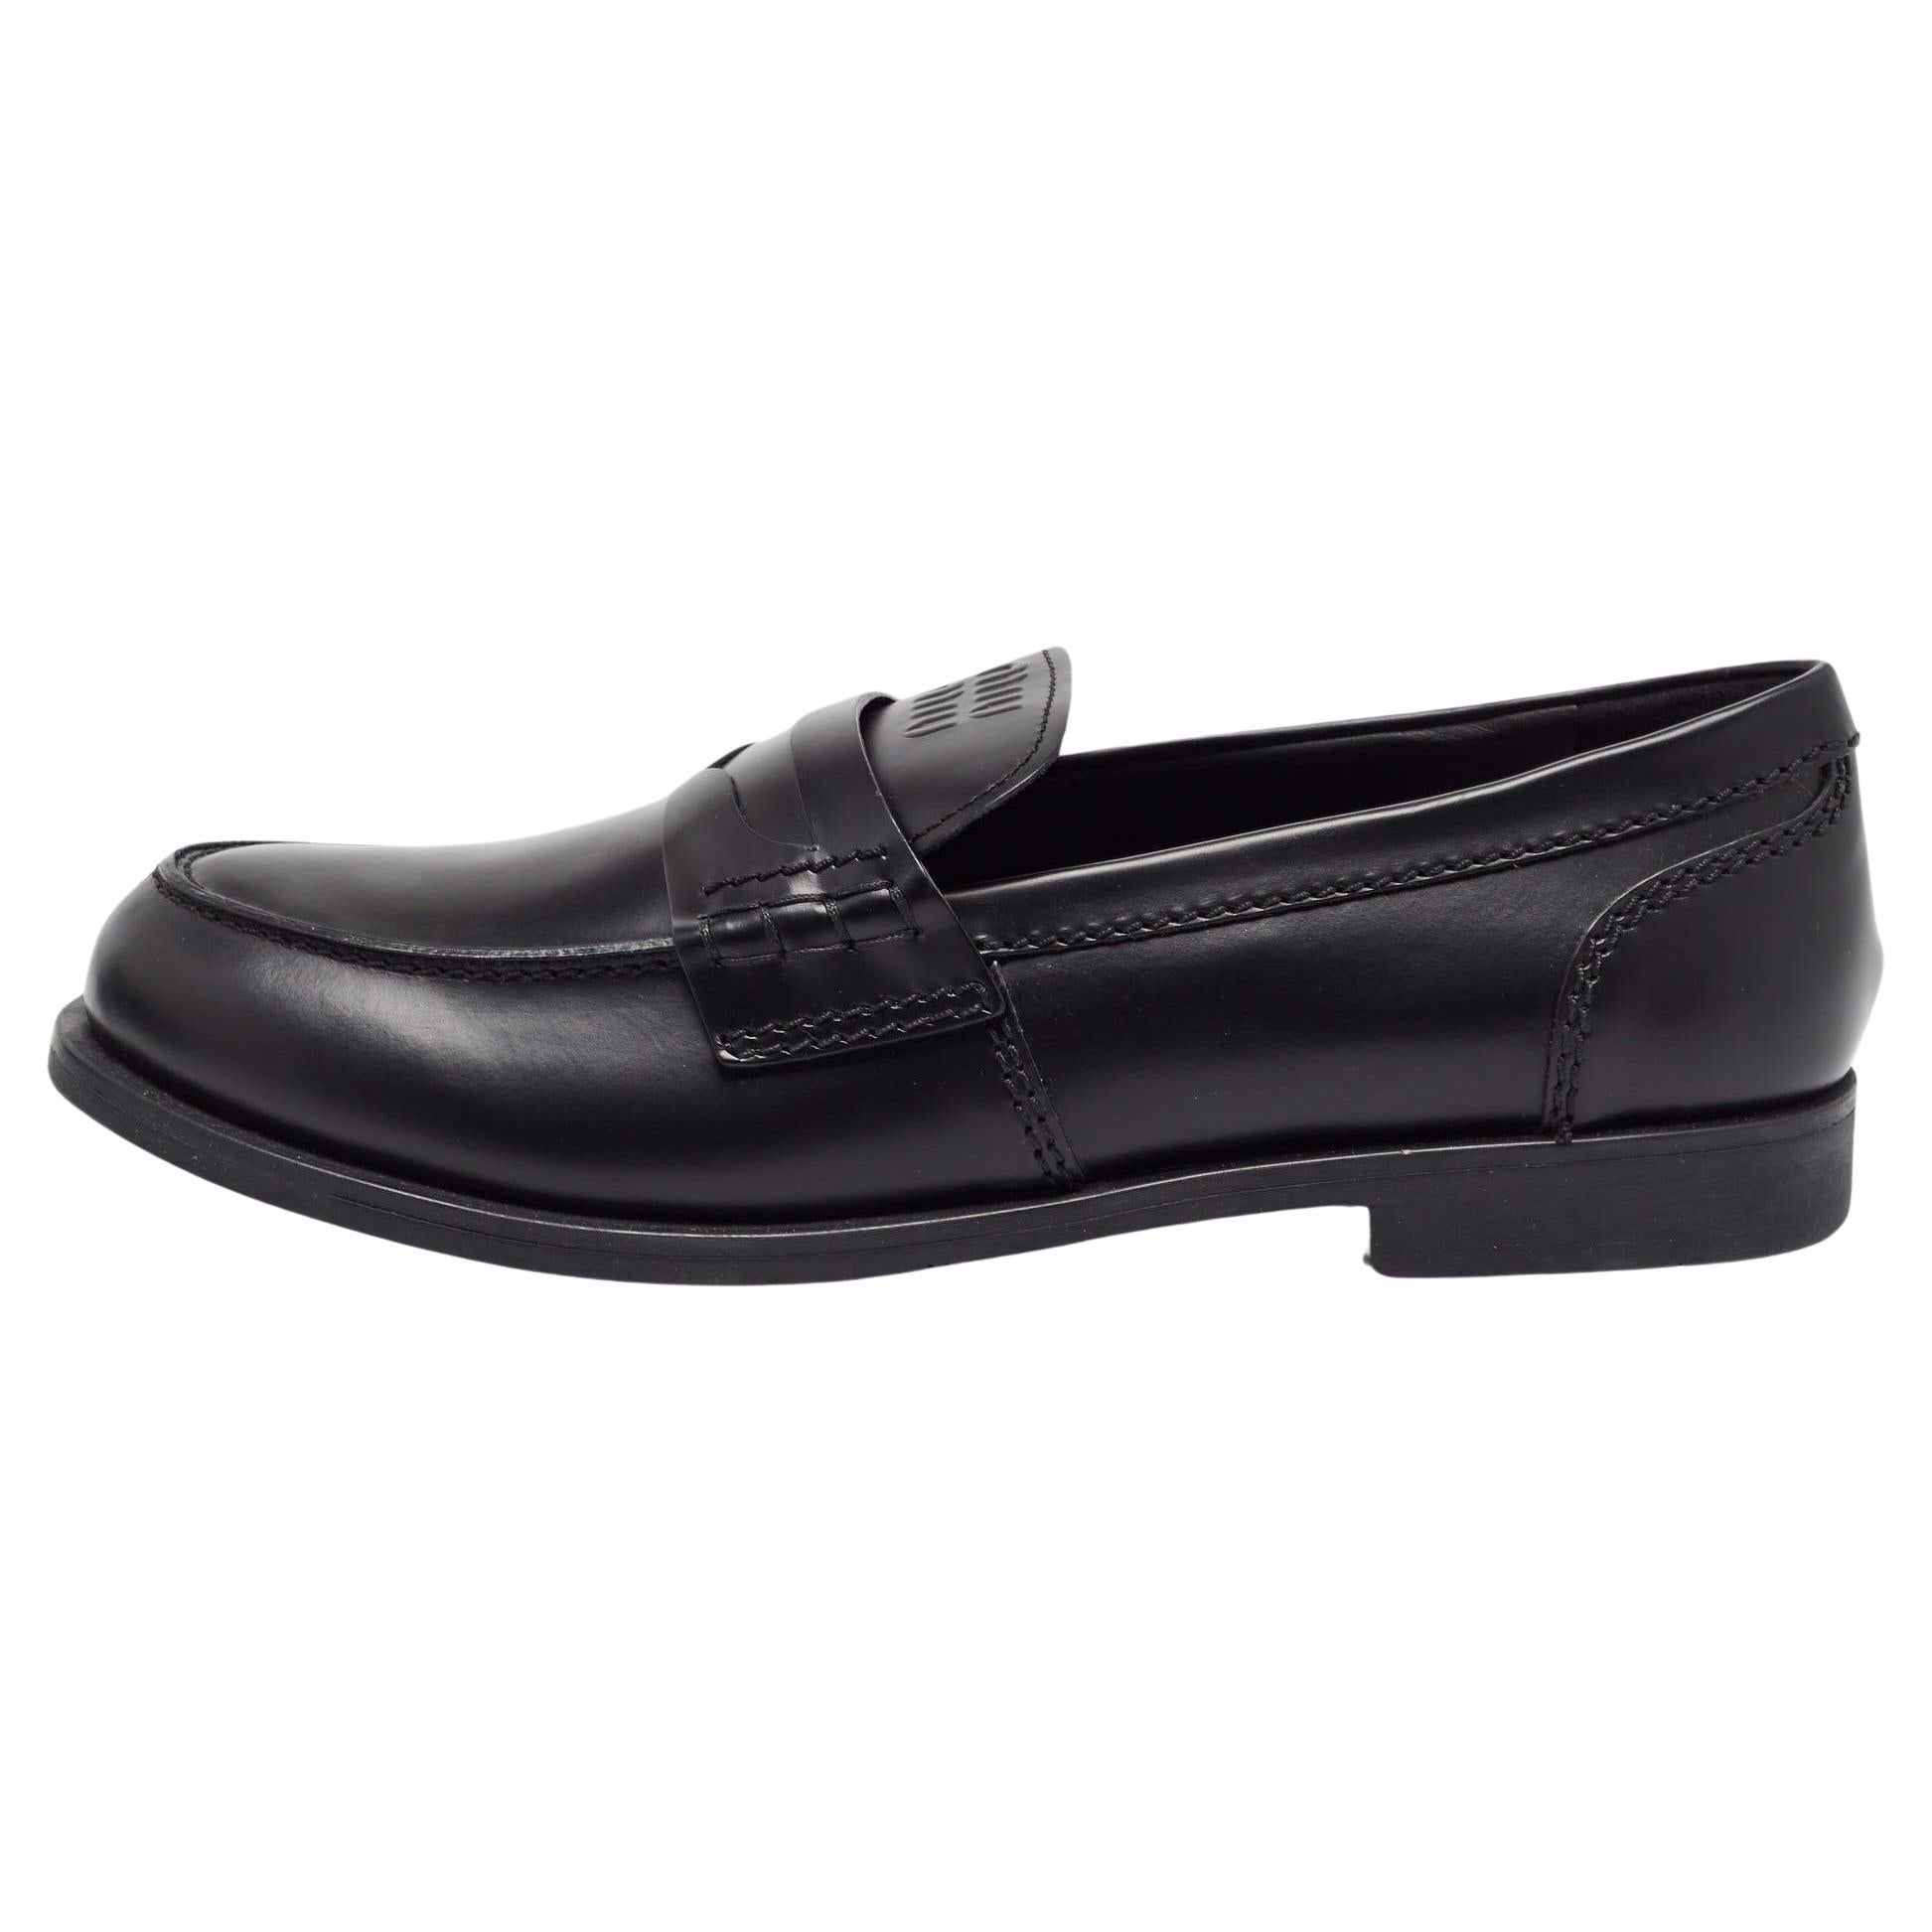 Miu Miu Black Leather Slip On Loafers Size 39.5 For Sale